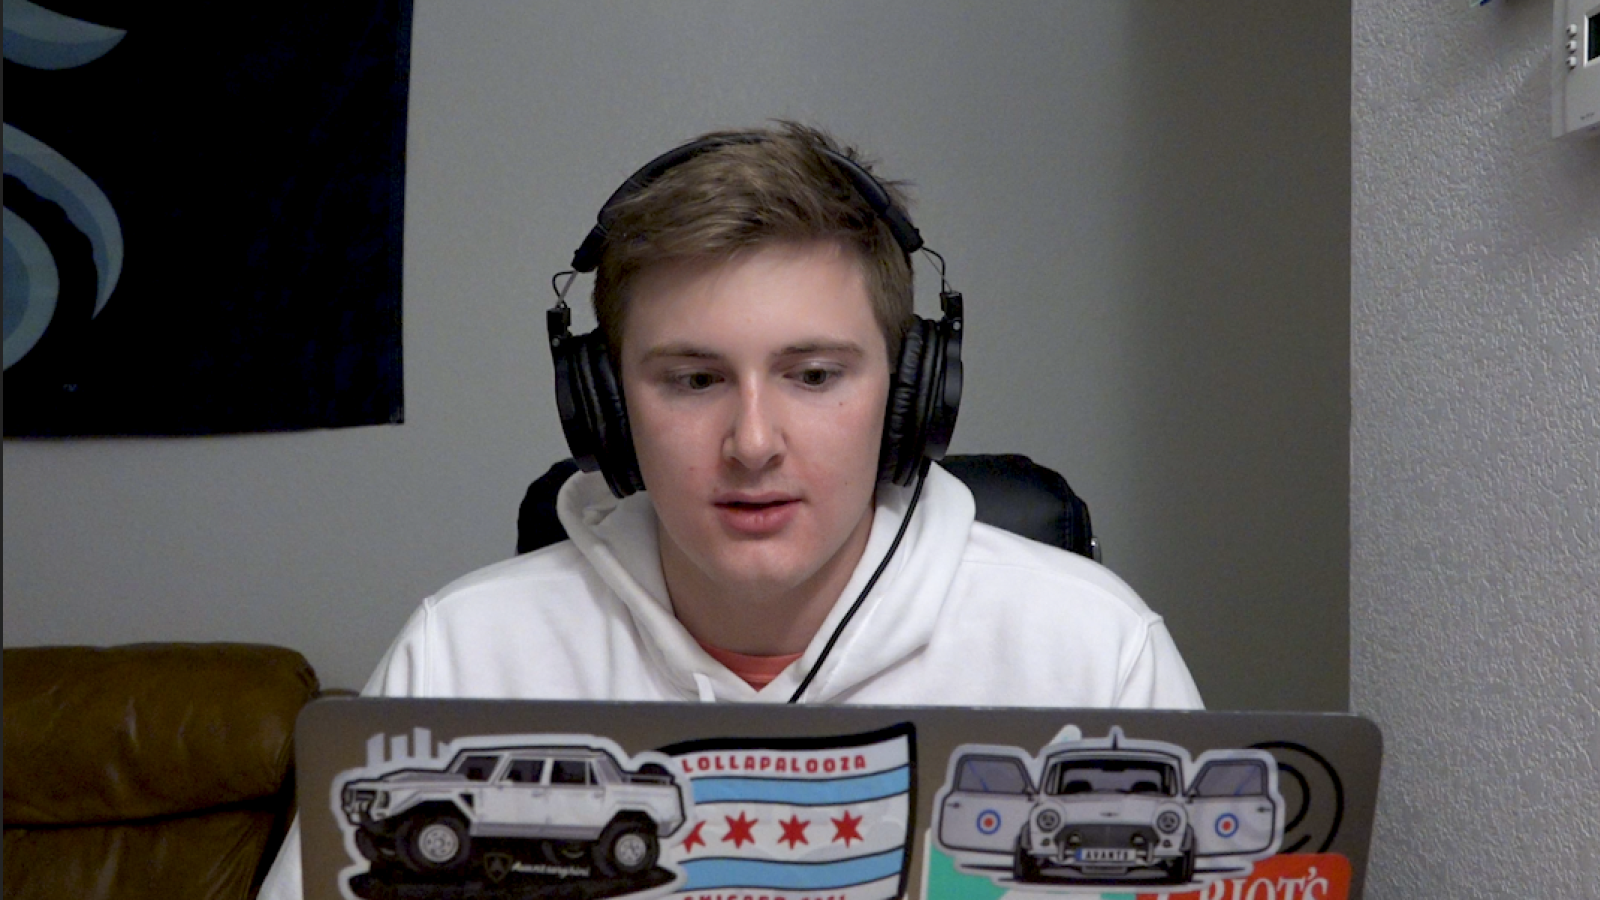 A full frame reaction image of Austin looking at his computer. He appears surprised.